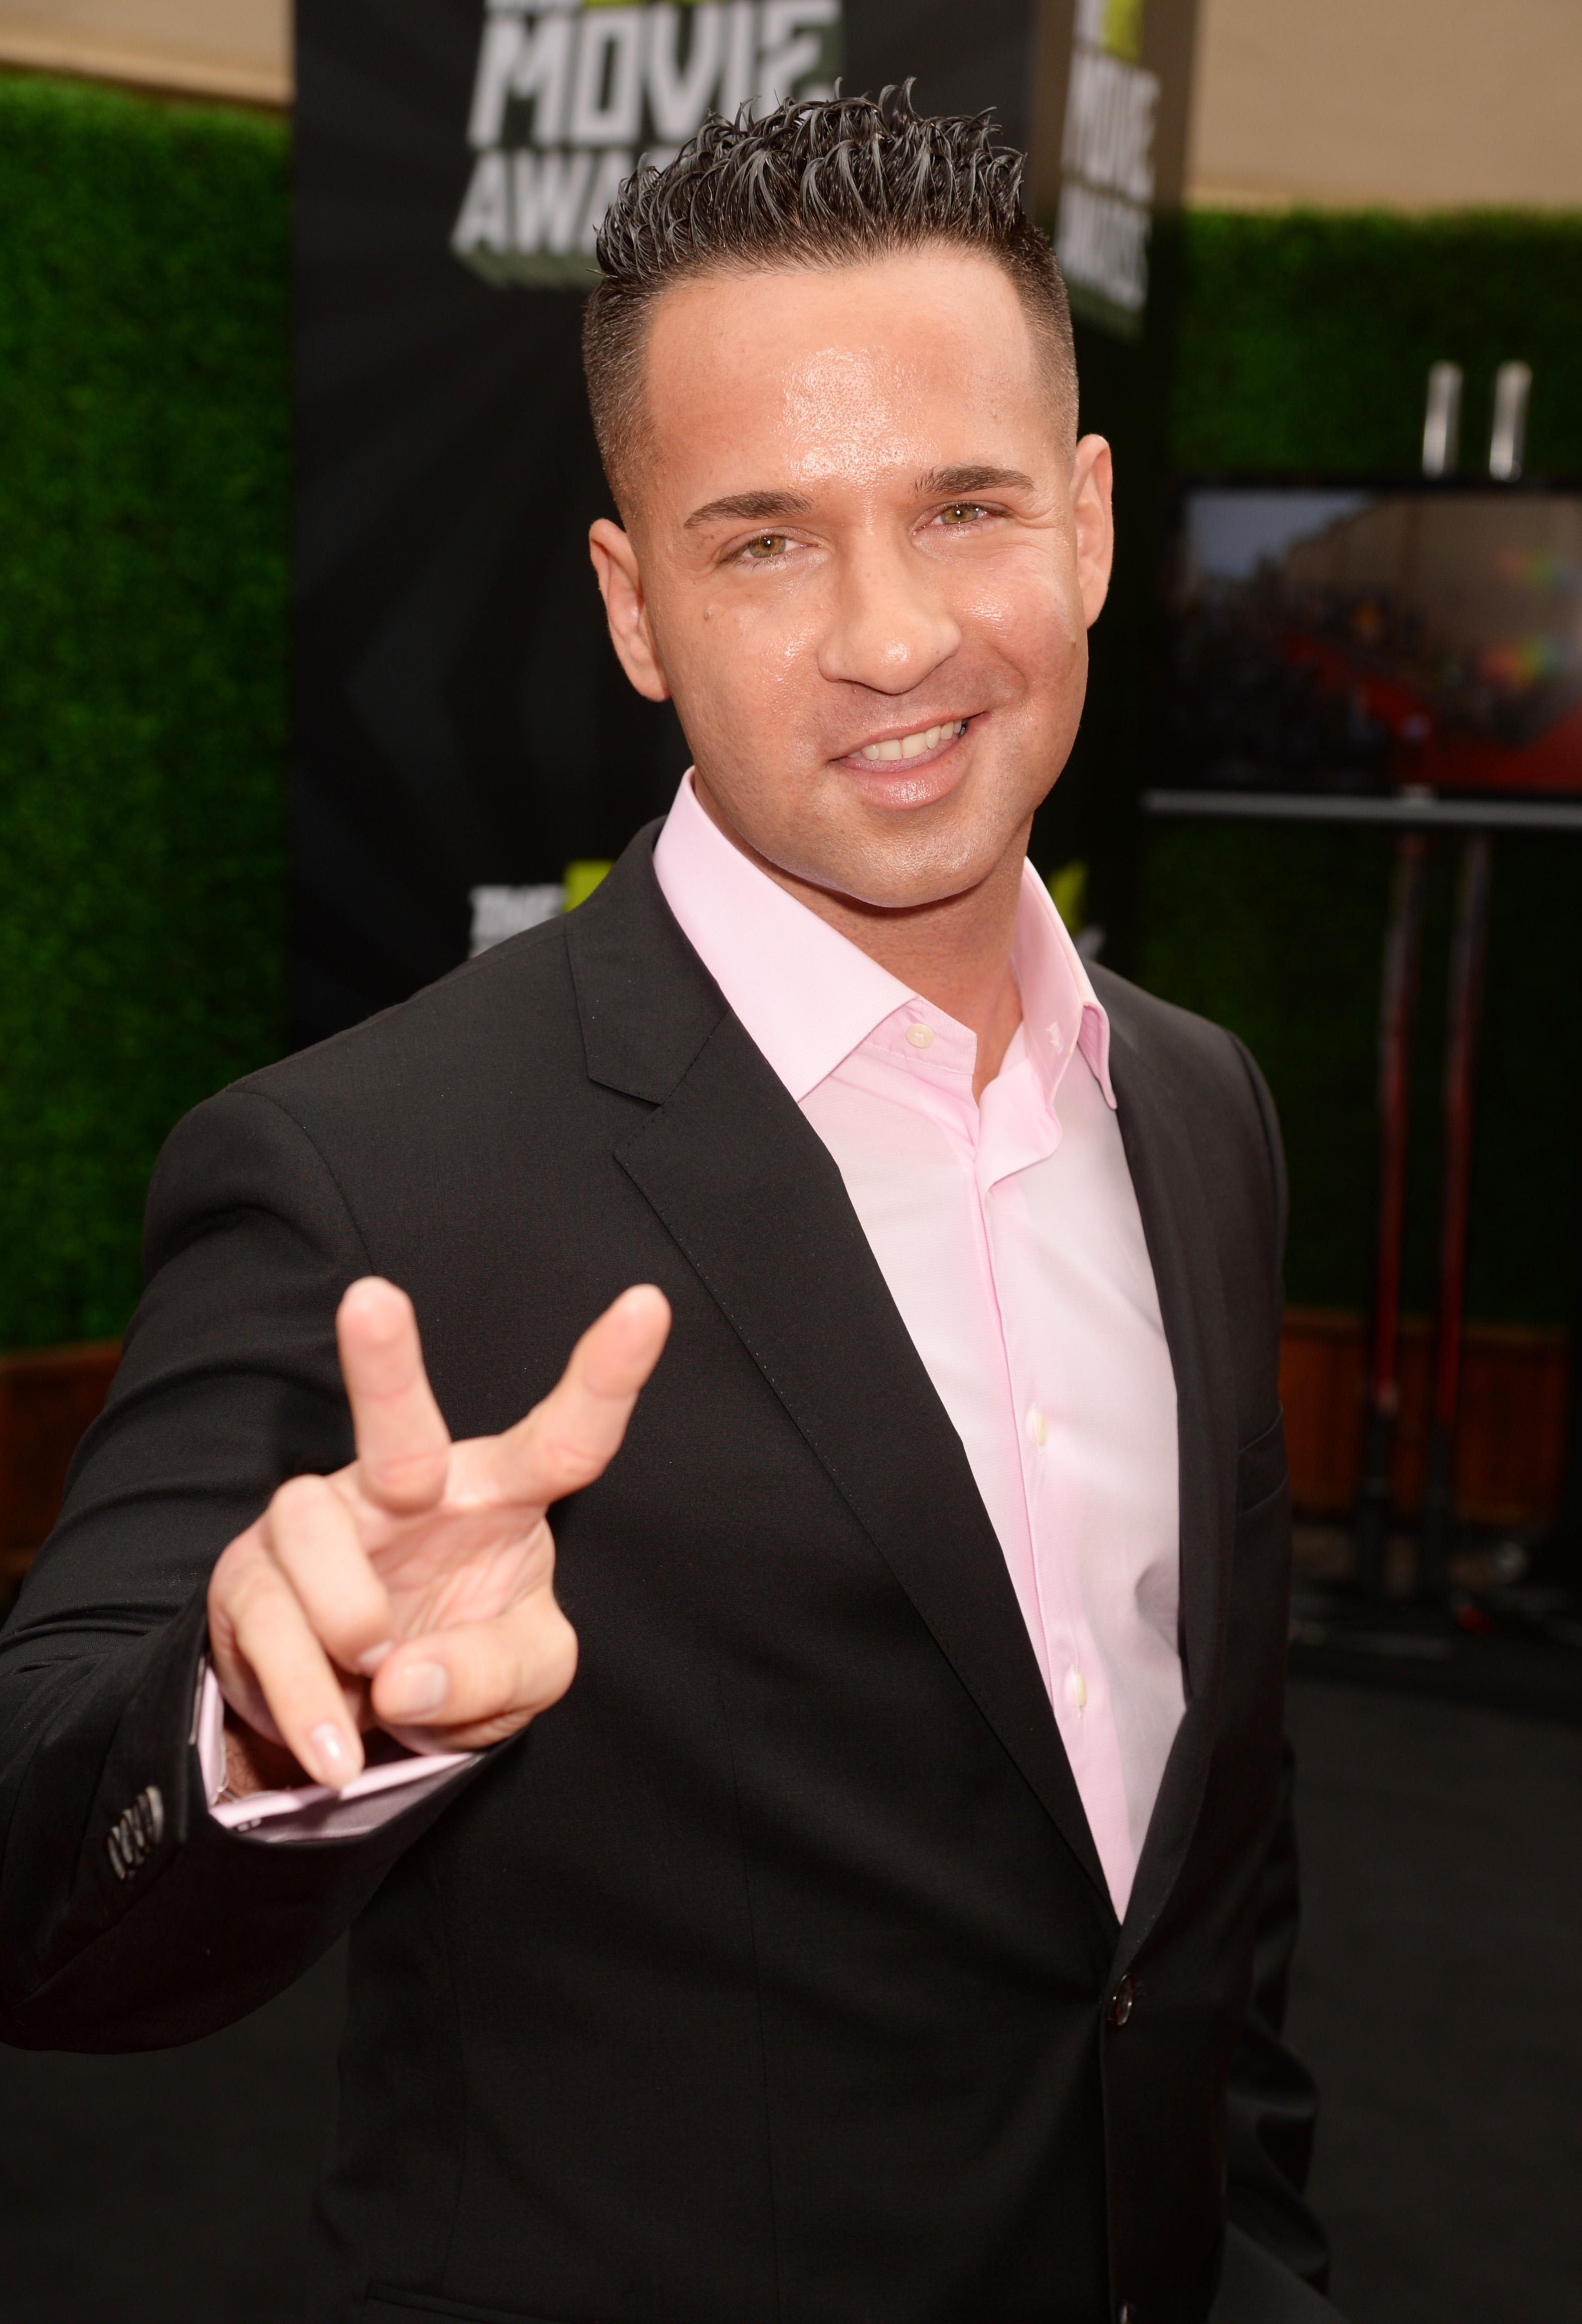 TV personality Mike 'The Situation' Sorrentino attends the 2013 MTV Movie Awards at Sony Pictures Studios on April 14, 2013 in Culver City, California. (Jeff Kravitz&mdash;FilmMagic)